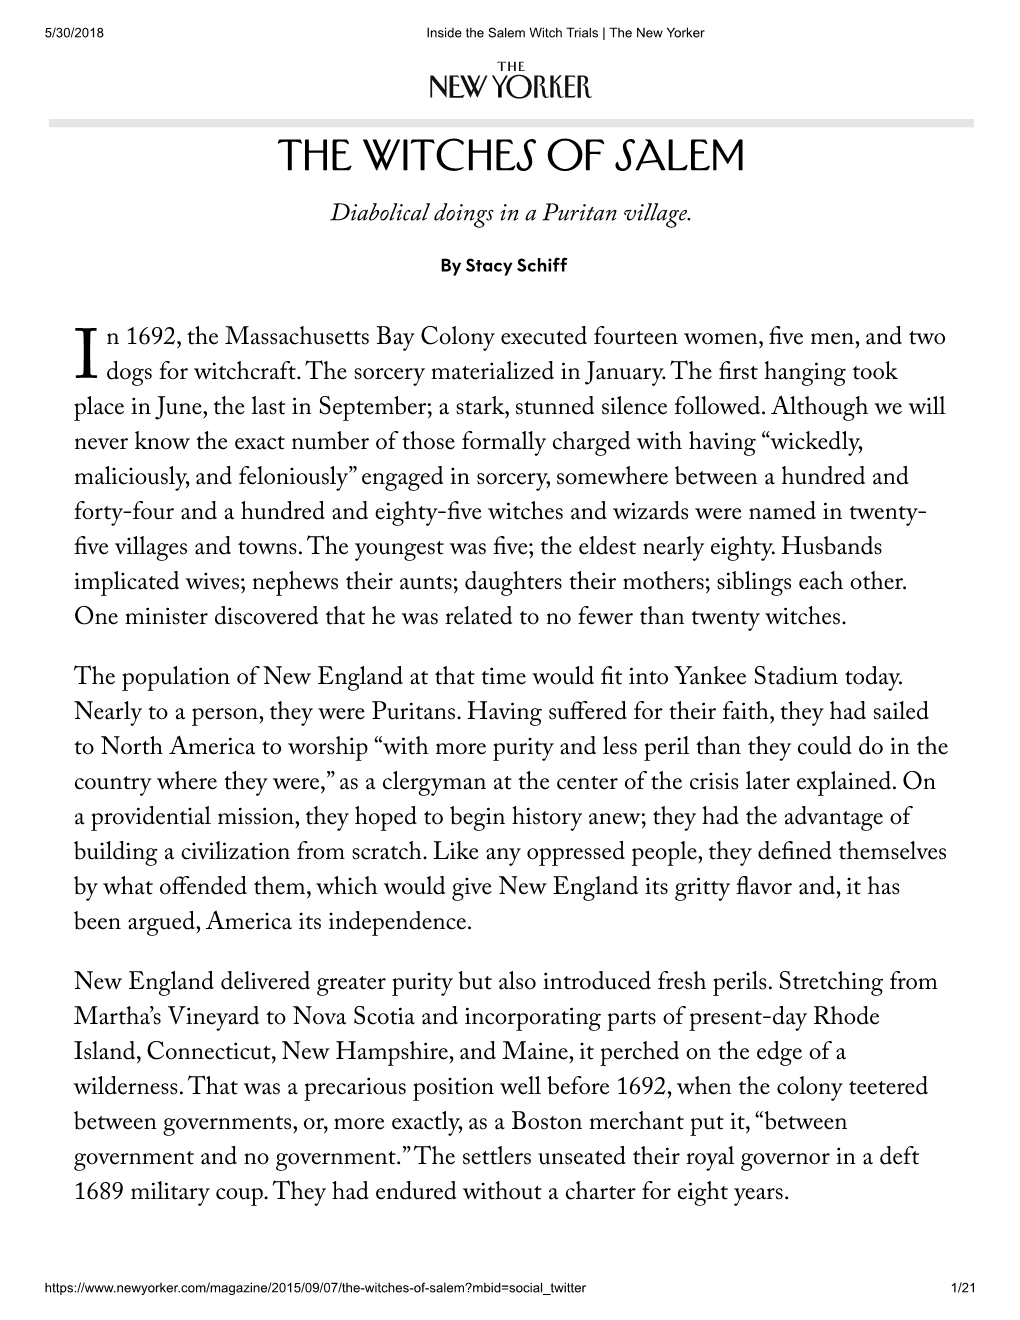 The Witches of Salem